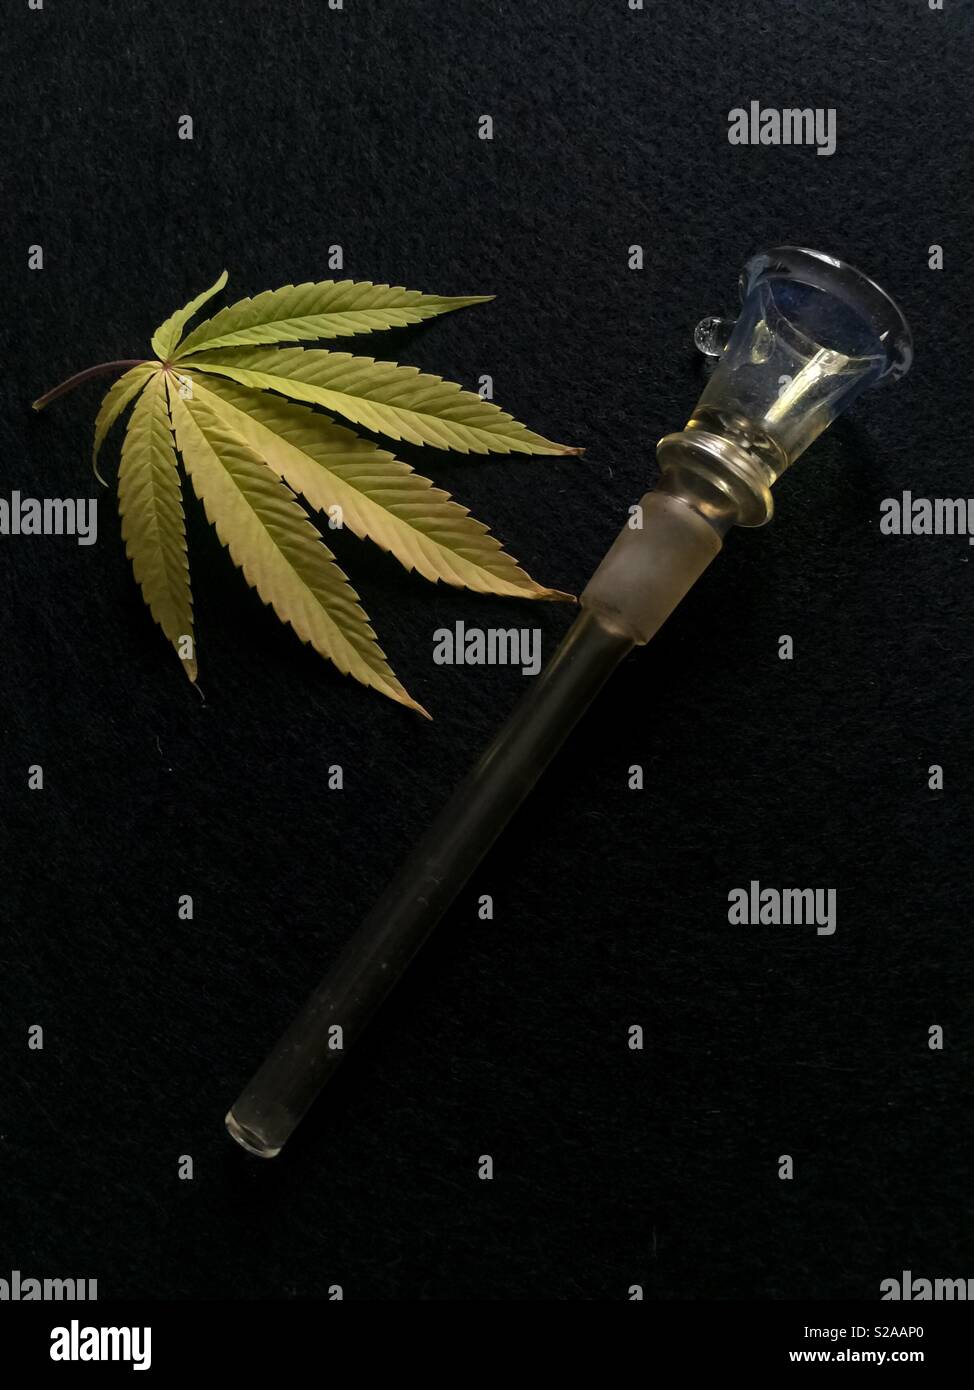 Pot and Pipe: conceptual image for recreational Cannabis  or medical marijuana smoking. Being legalized or decriminalized in many countries and U.S. states. Real leaf. Room for text. Vertical. Stock Photo